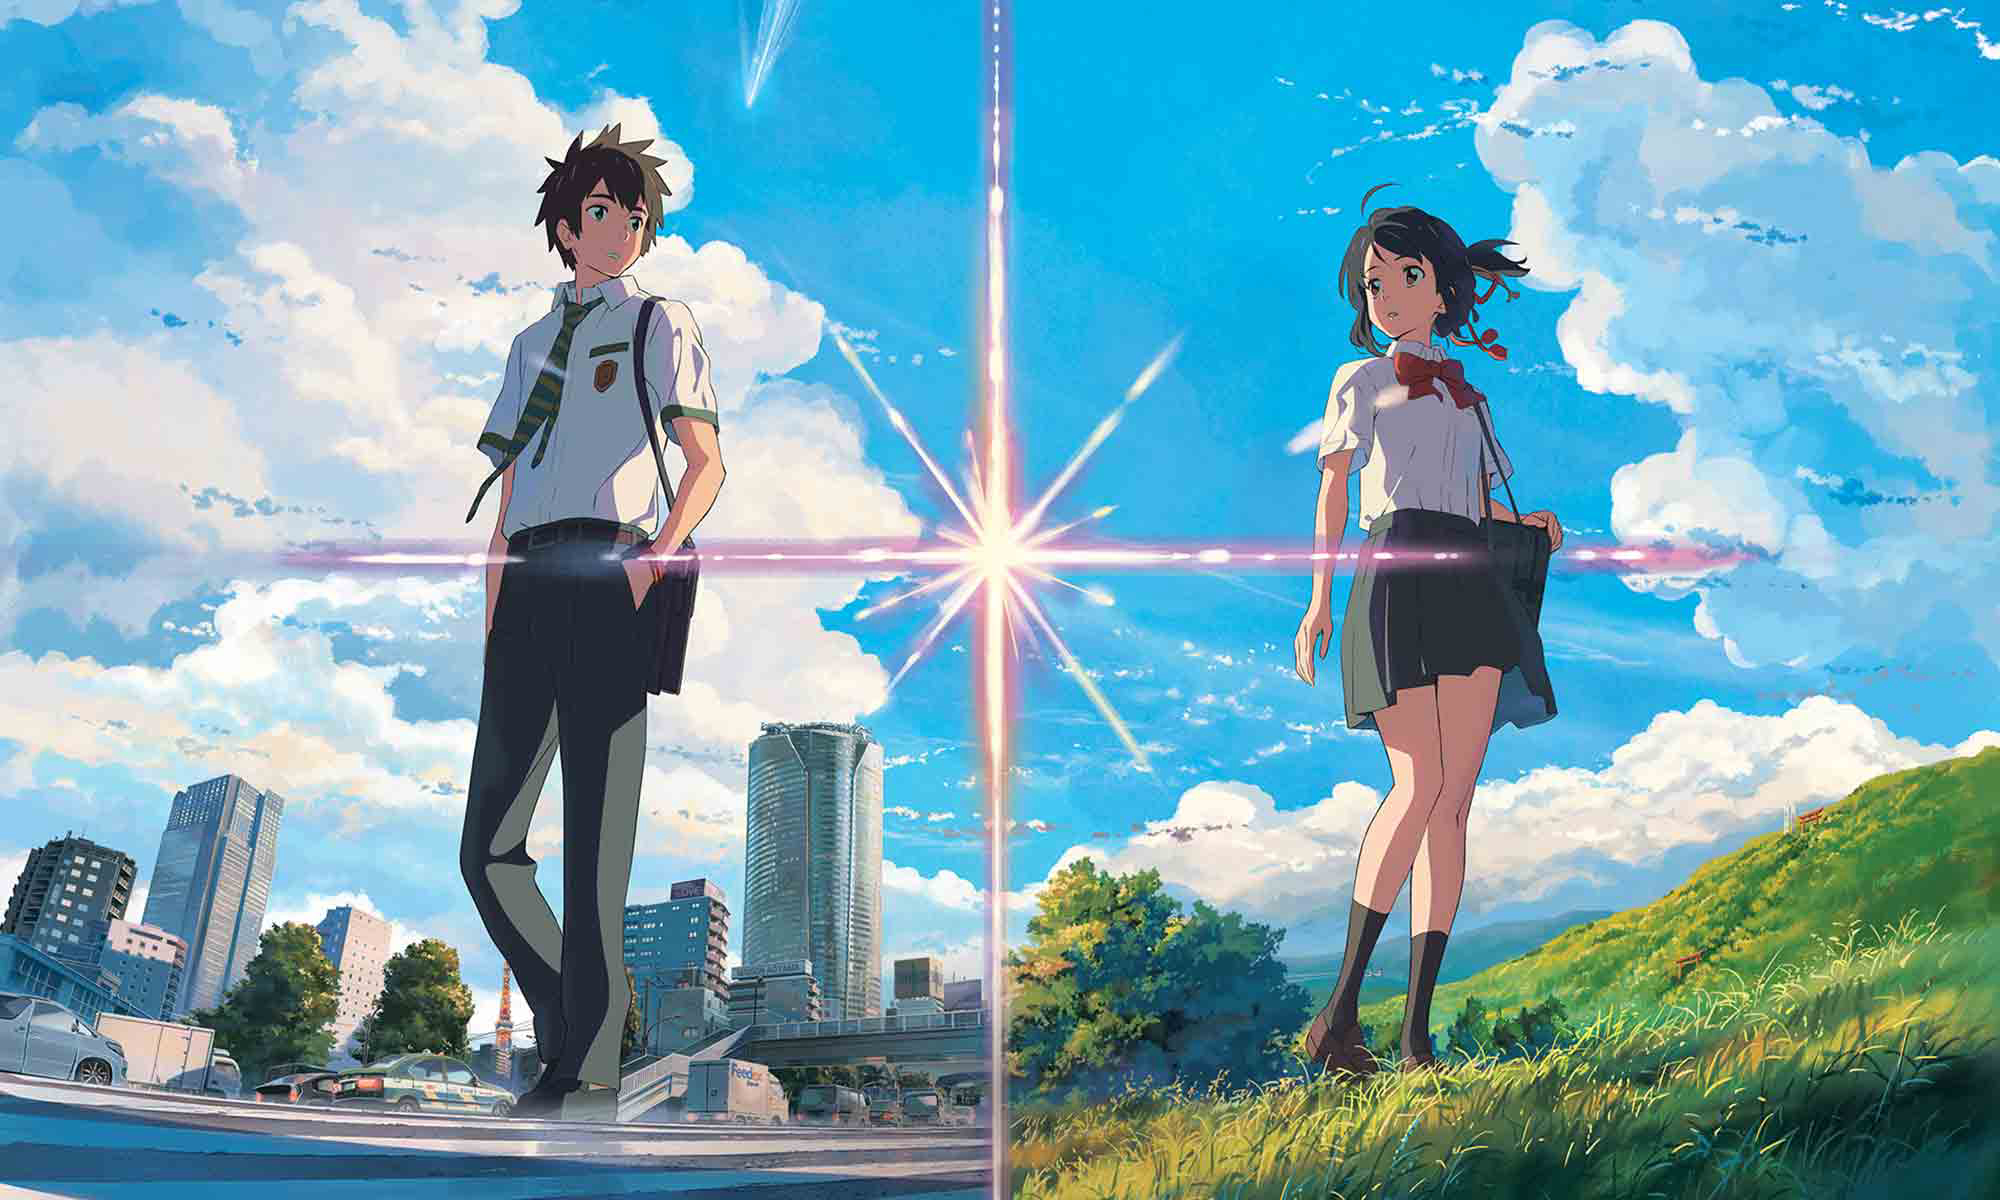 Your Name. / Your Name. (2016)